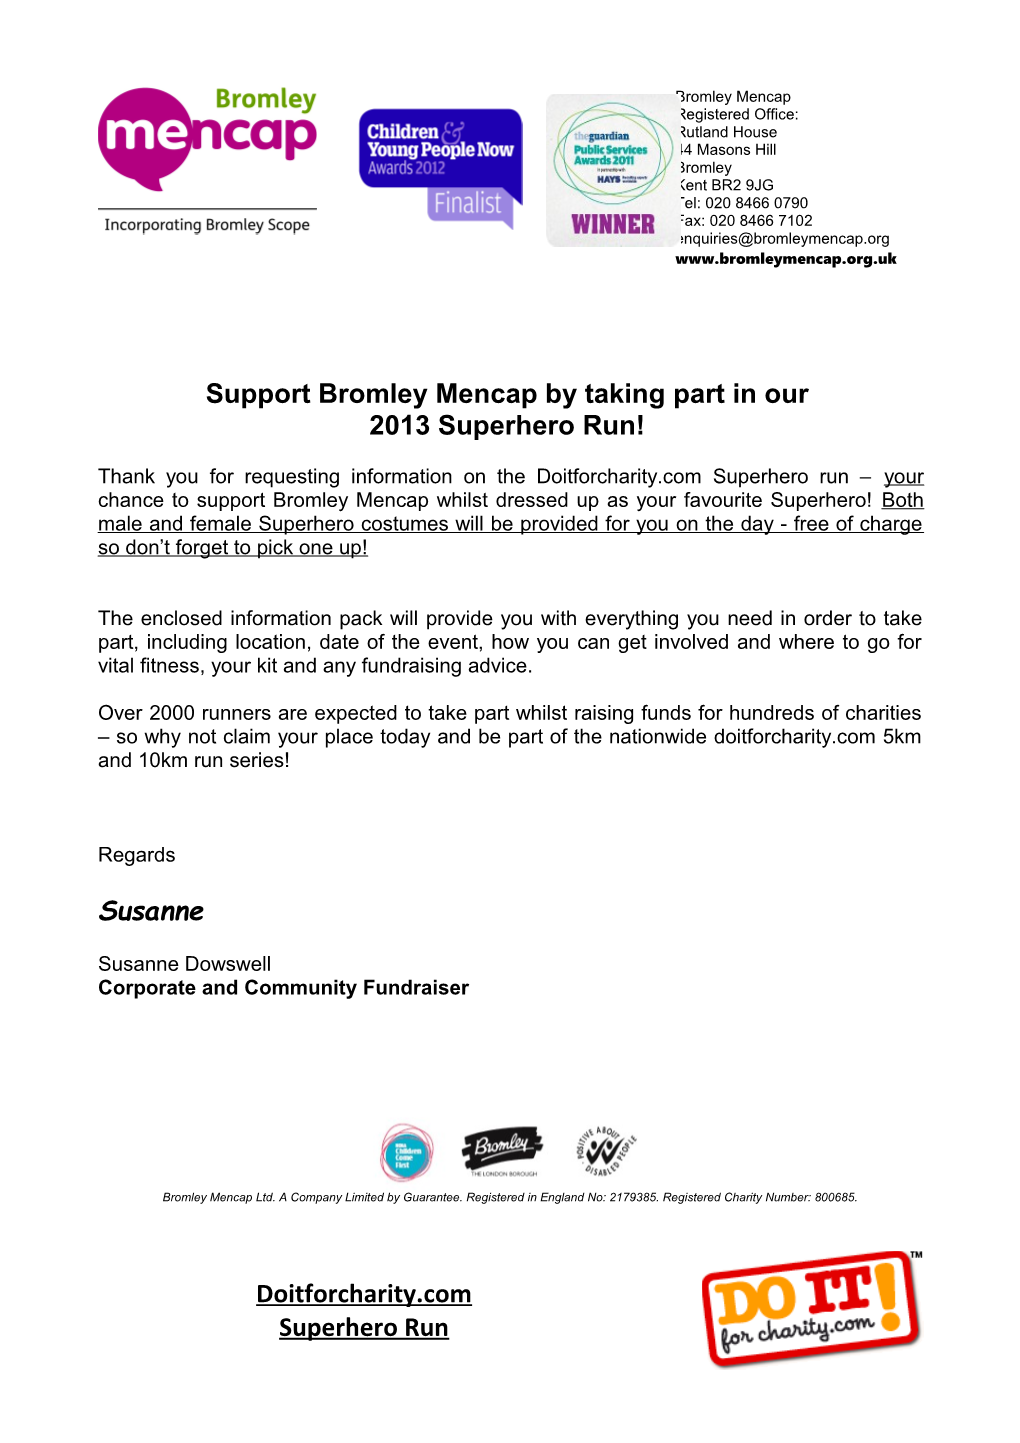 Support Bromley Mencap by Taking Part in Our